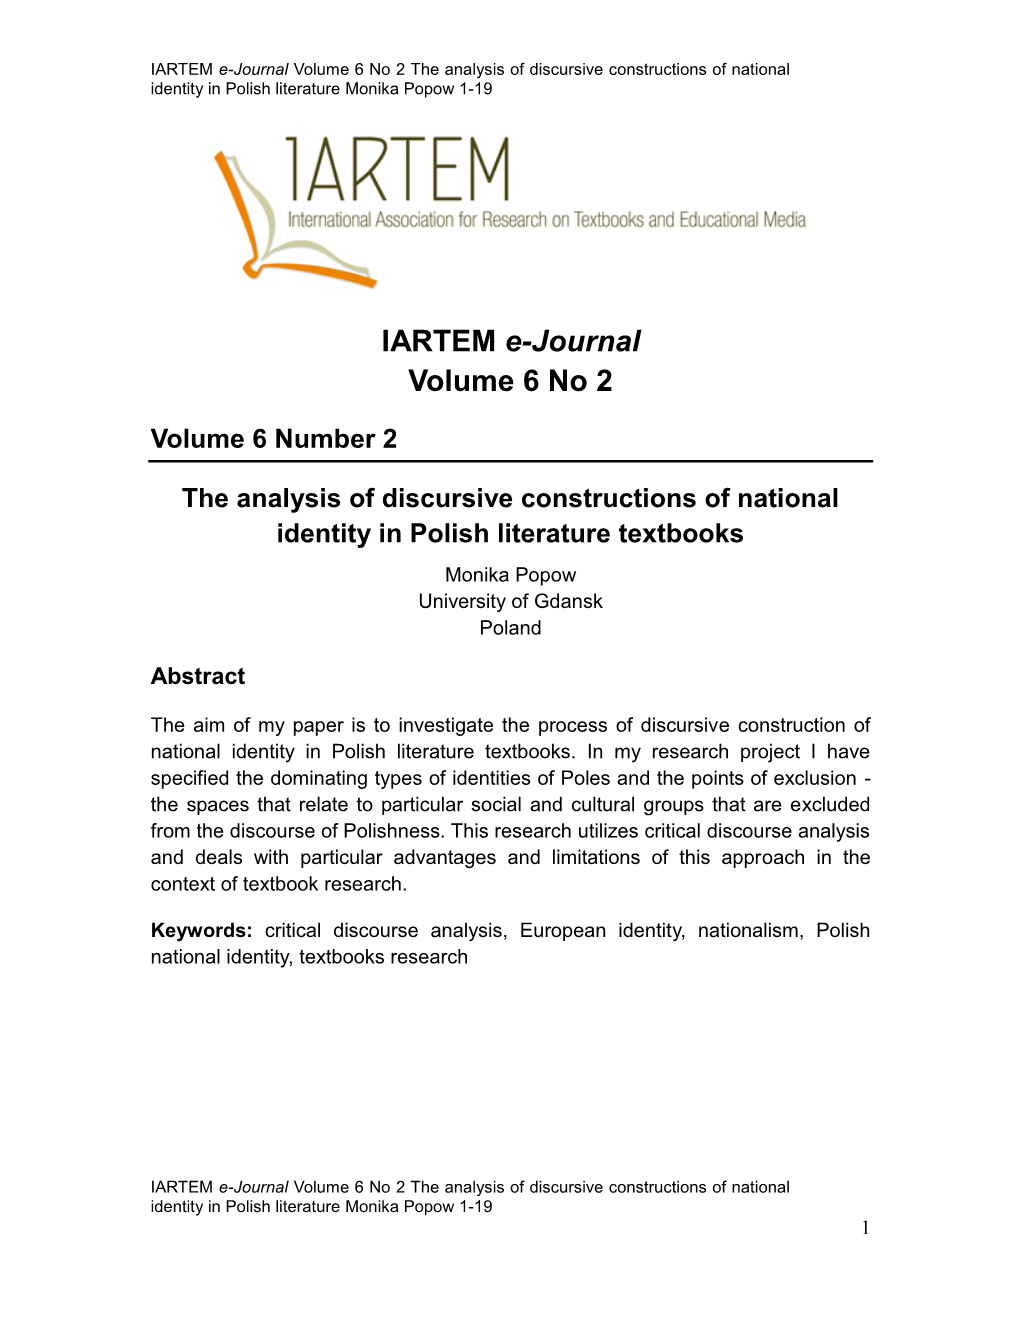 IARTEM E-Journal Volume 6 No 2 the Analysis of Discursive Constructions of National Identity in Polish Literature Monika Popow 1-19